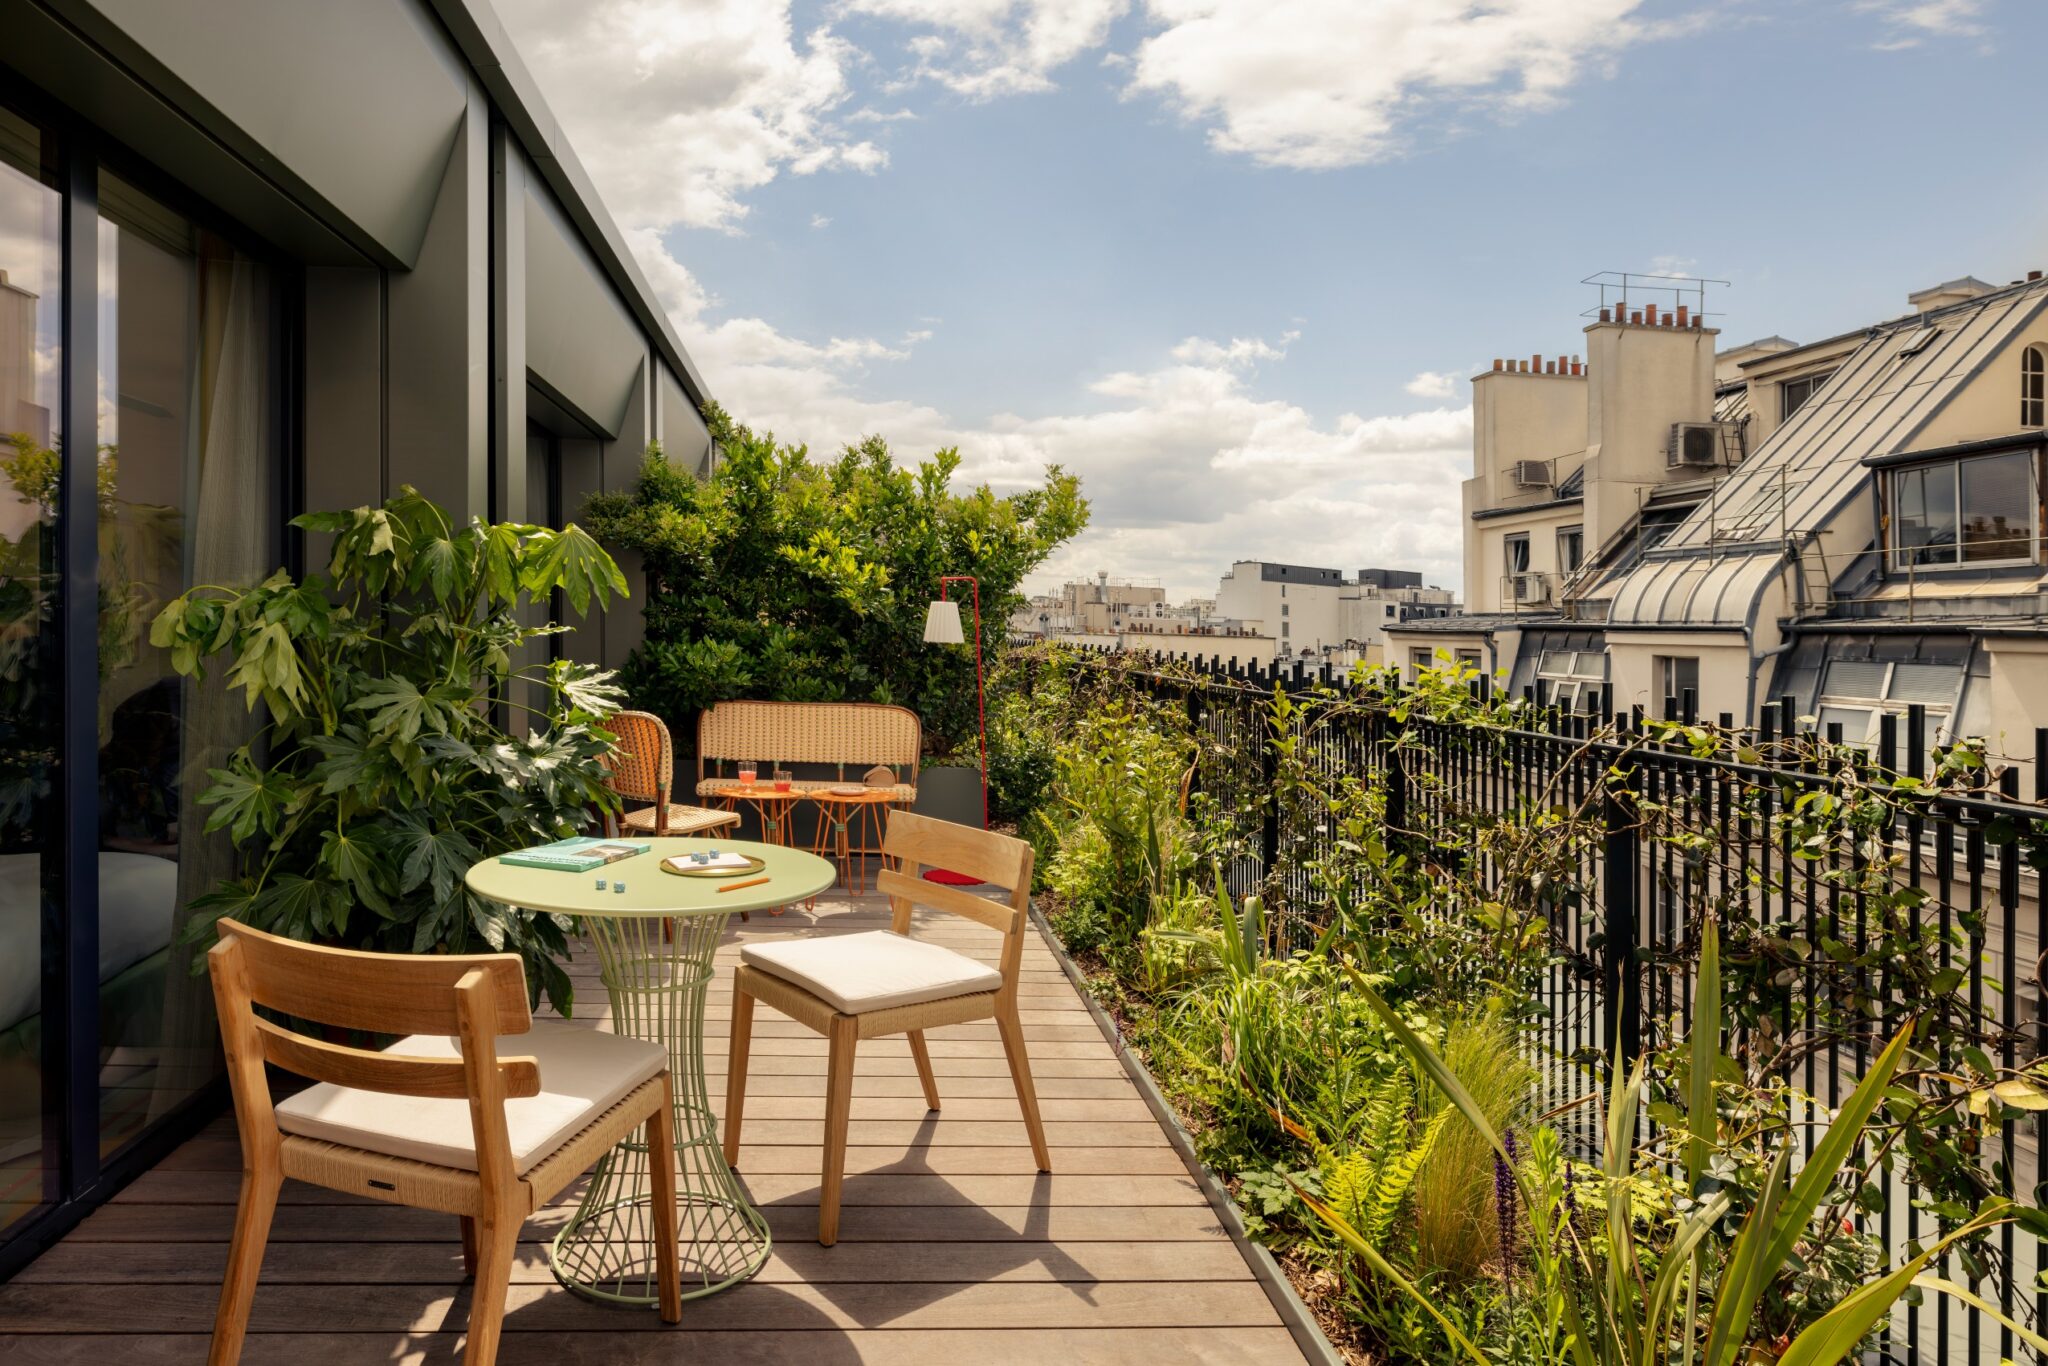 A Fantastical Stay and Secret Garden Await at This Boutique Hotel in Paris